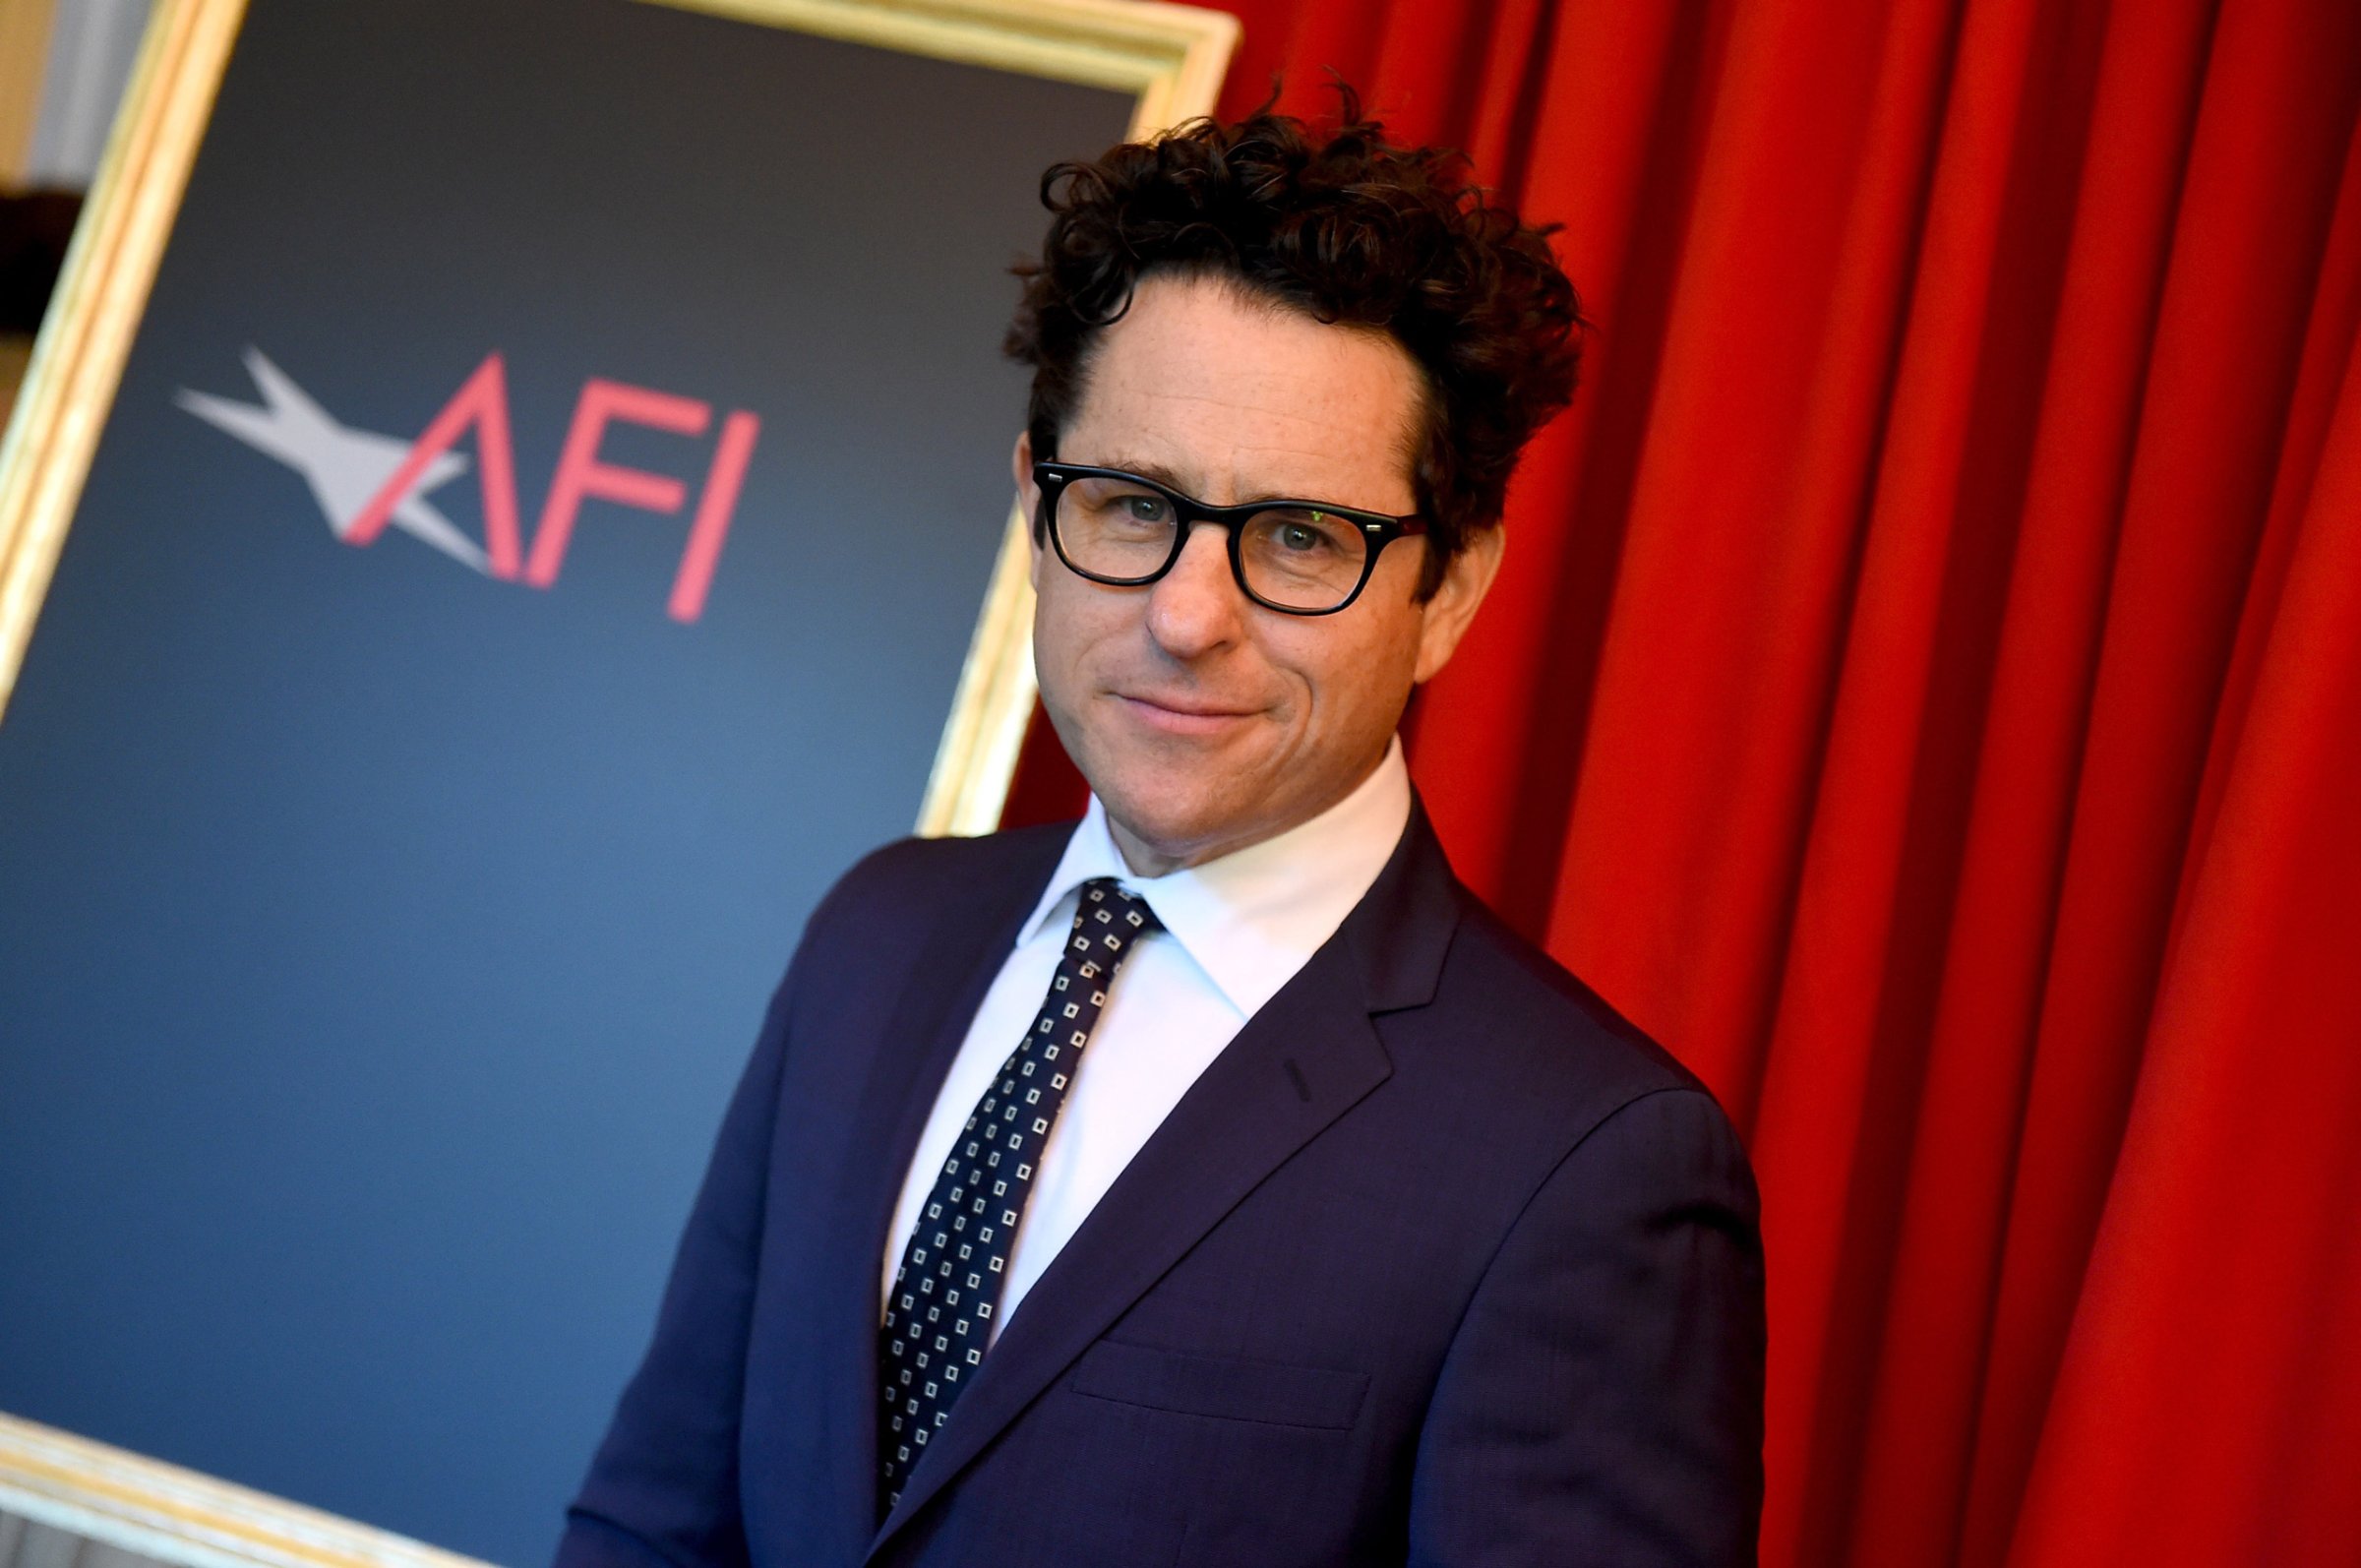 BEVERLY HILLS, CA - JANUARY 08: Director J.J. Abrams attends the 16th Annual AFI Awards at Four Seasons Hotel Los Angeles at Beverly Hills on January 8, 2016 in Beverly Hills, California. (Photo by Kevin Winter/Getty Images for AFI)